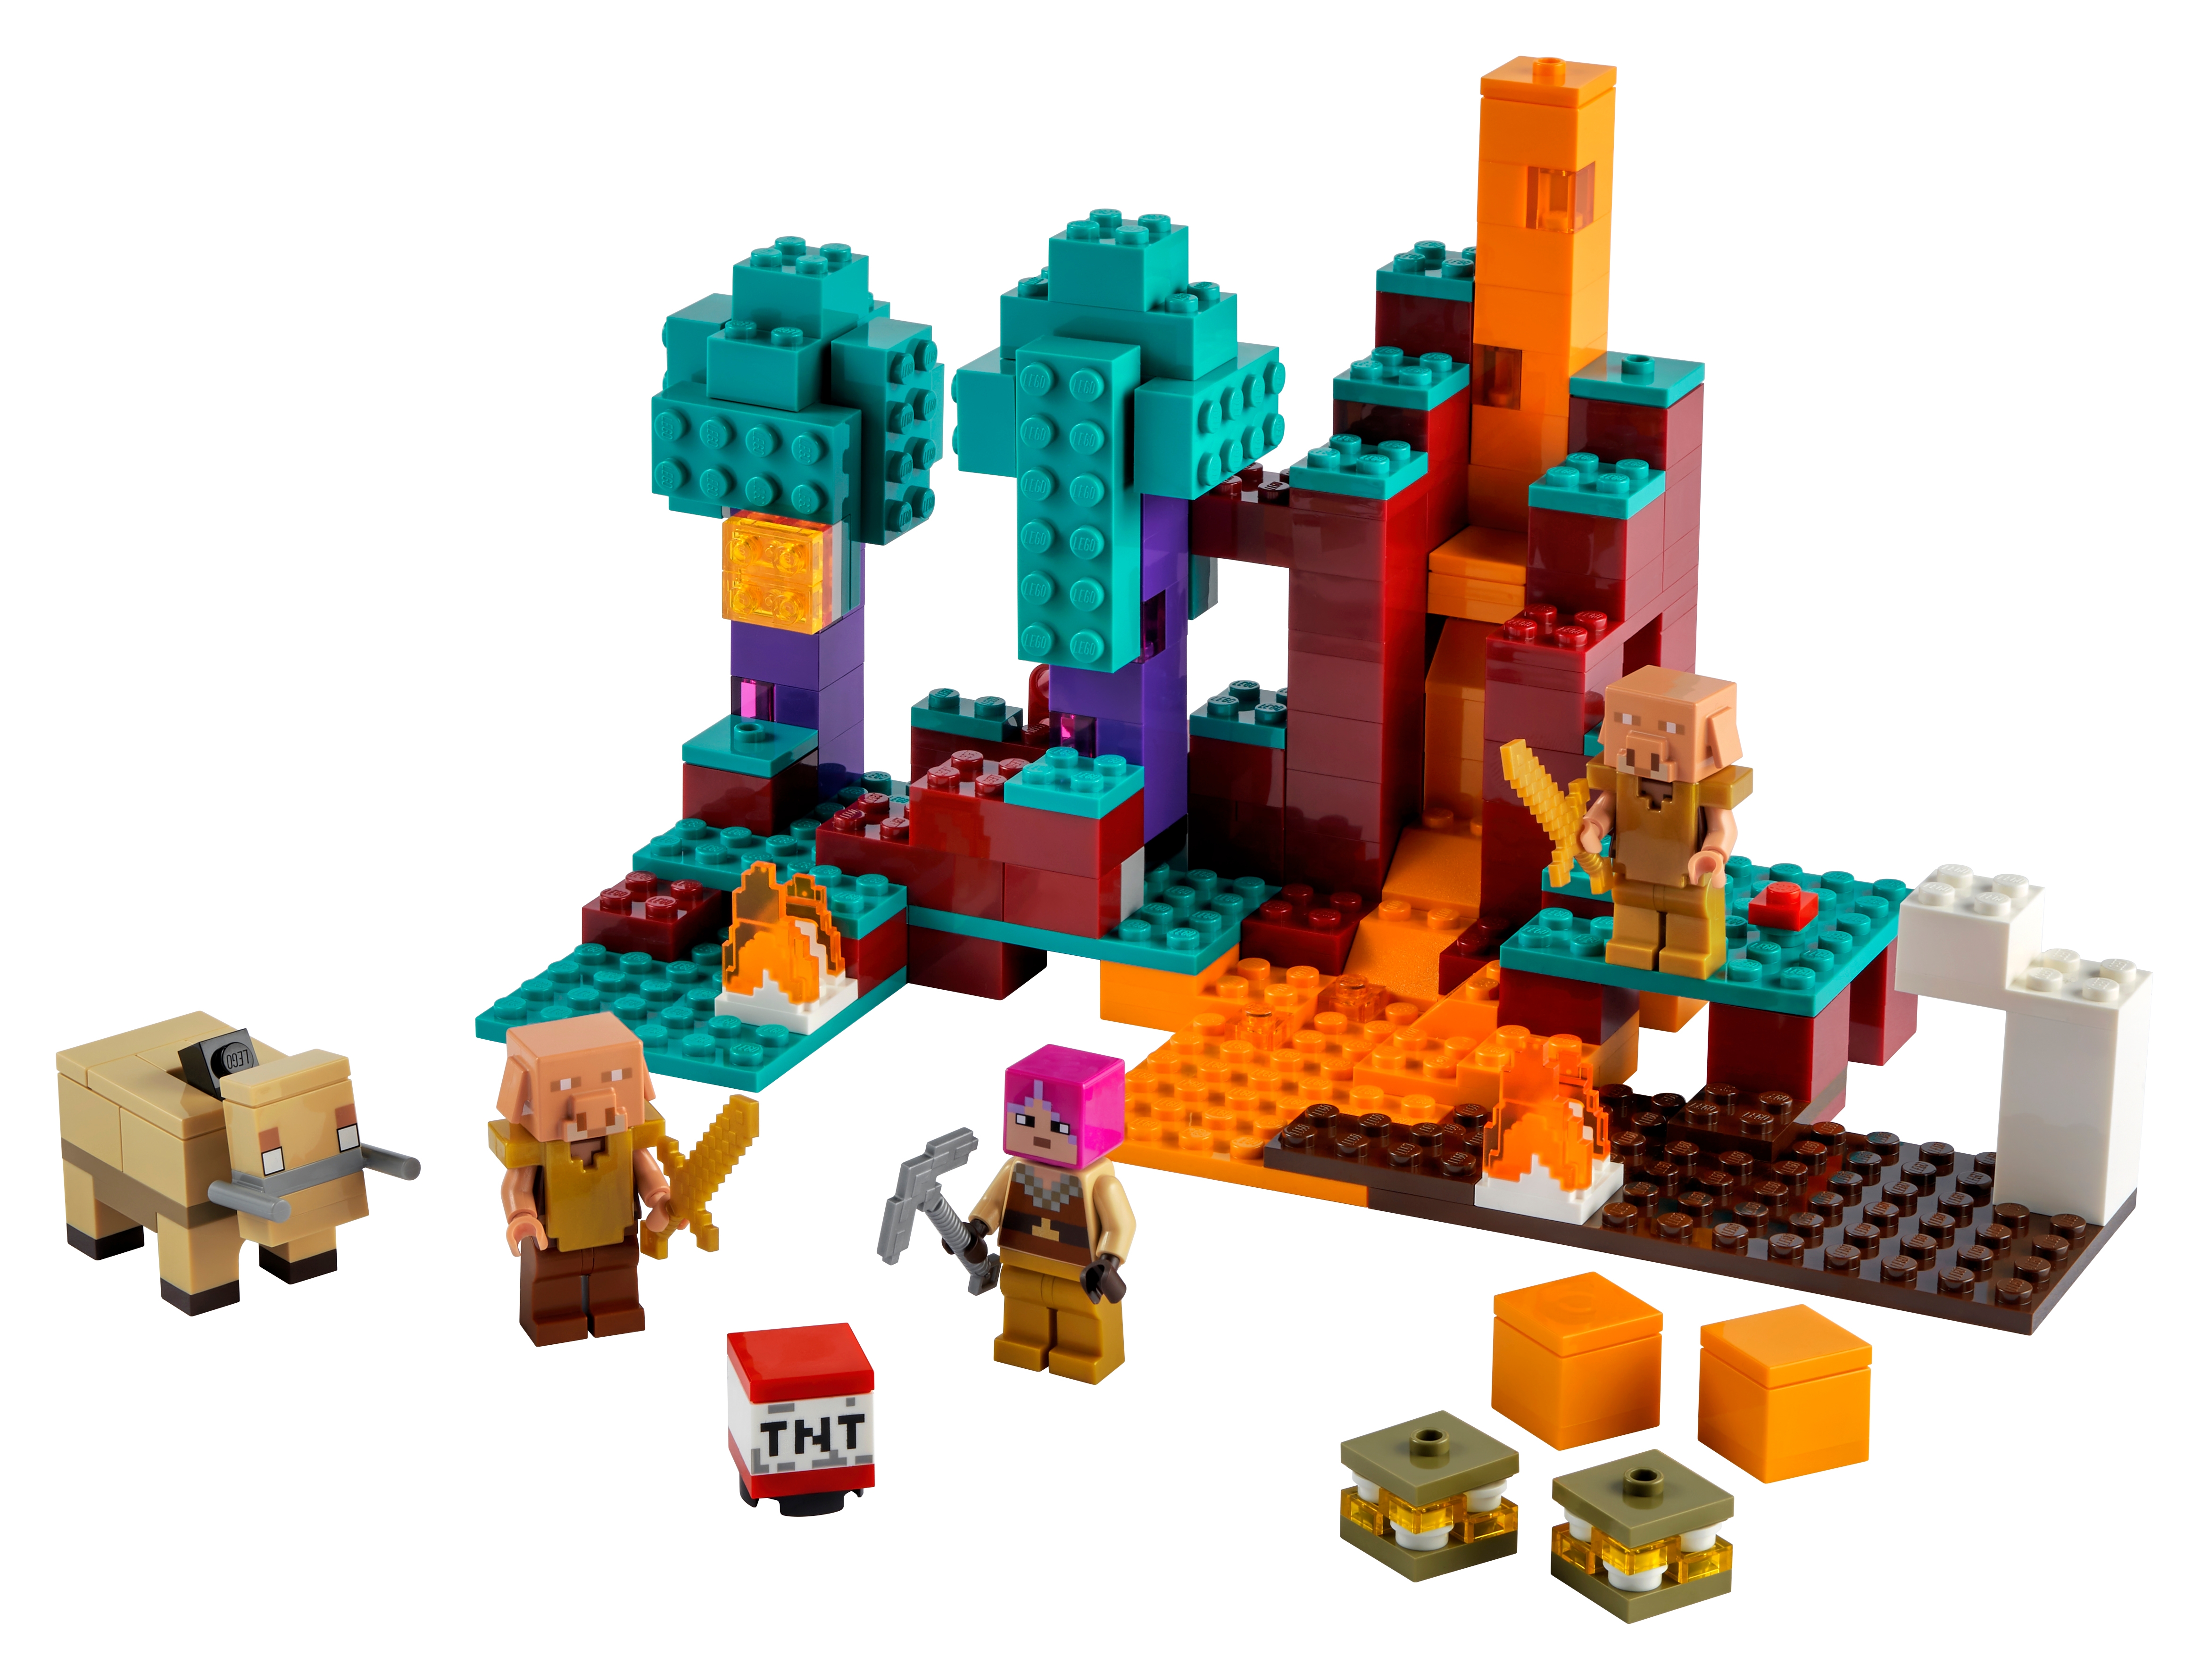 The Warped Forest Minecraft Buy Online At The Official Lego Shop Us